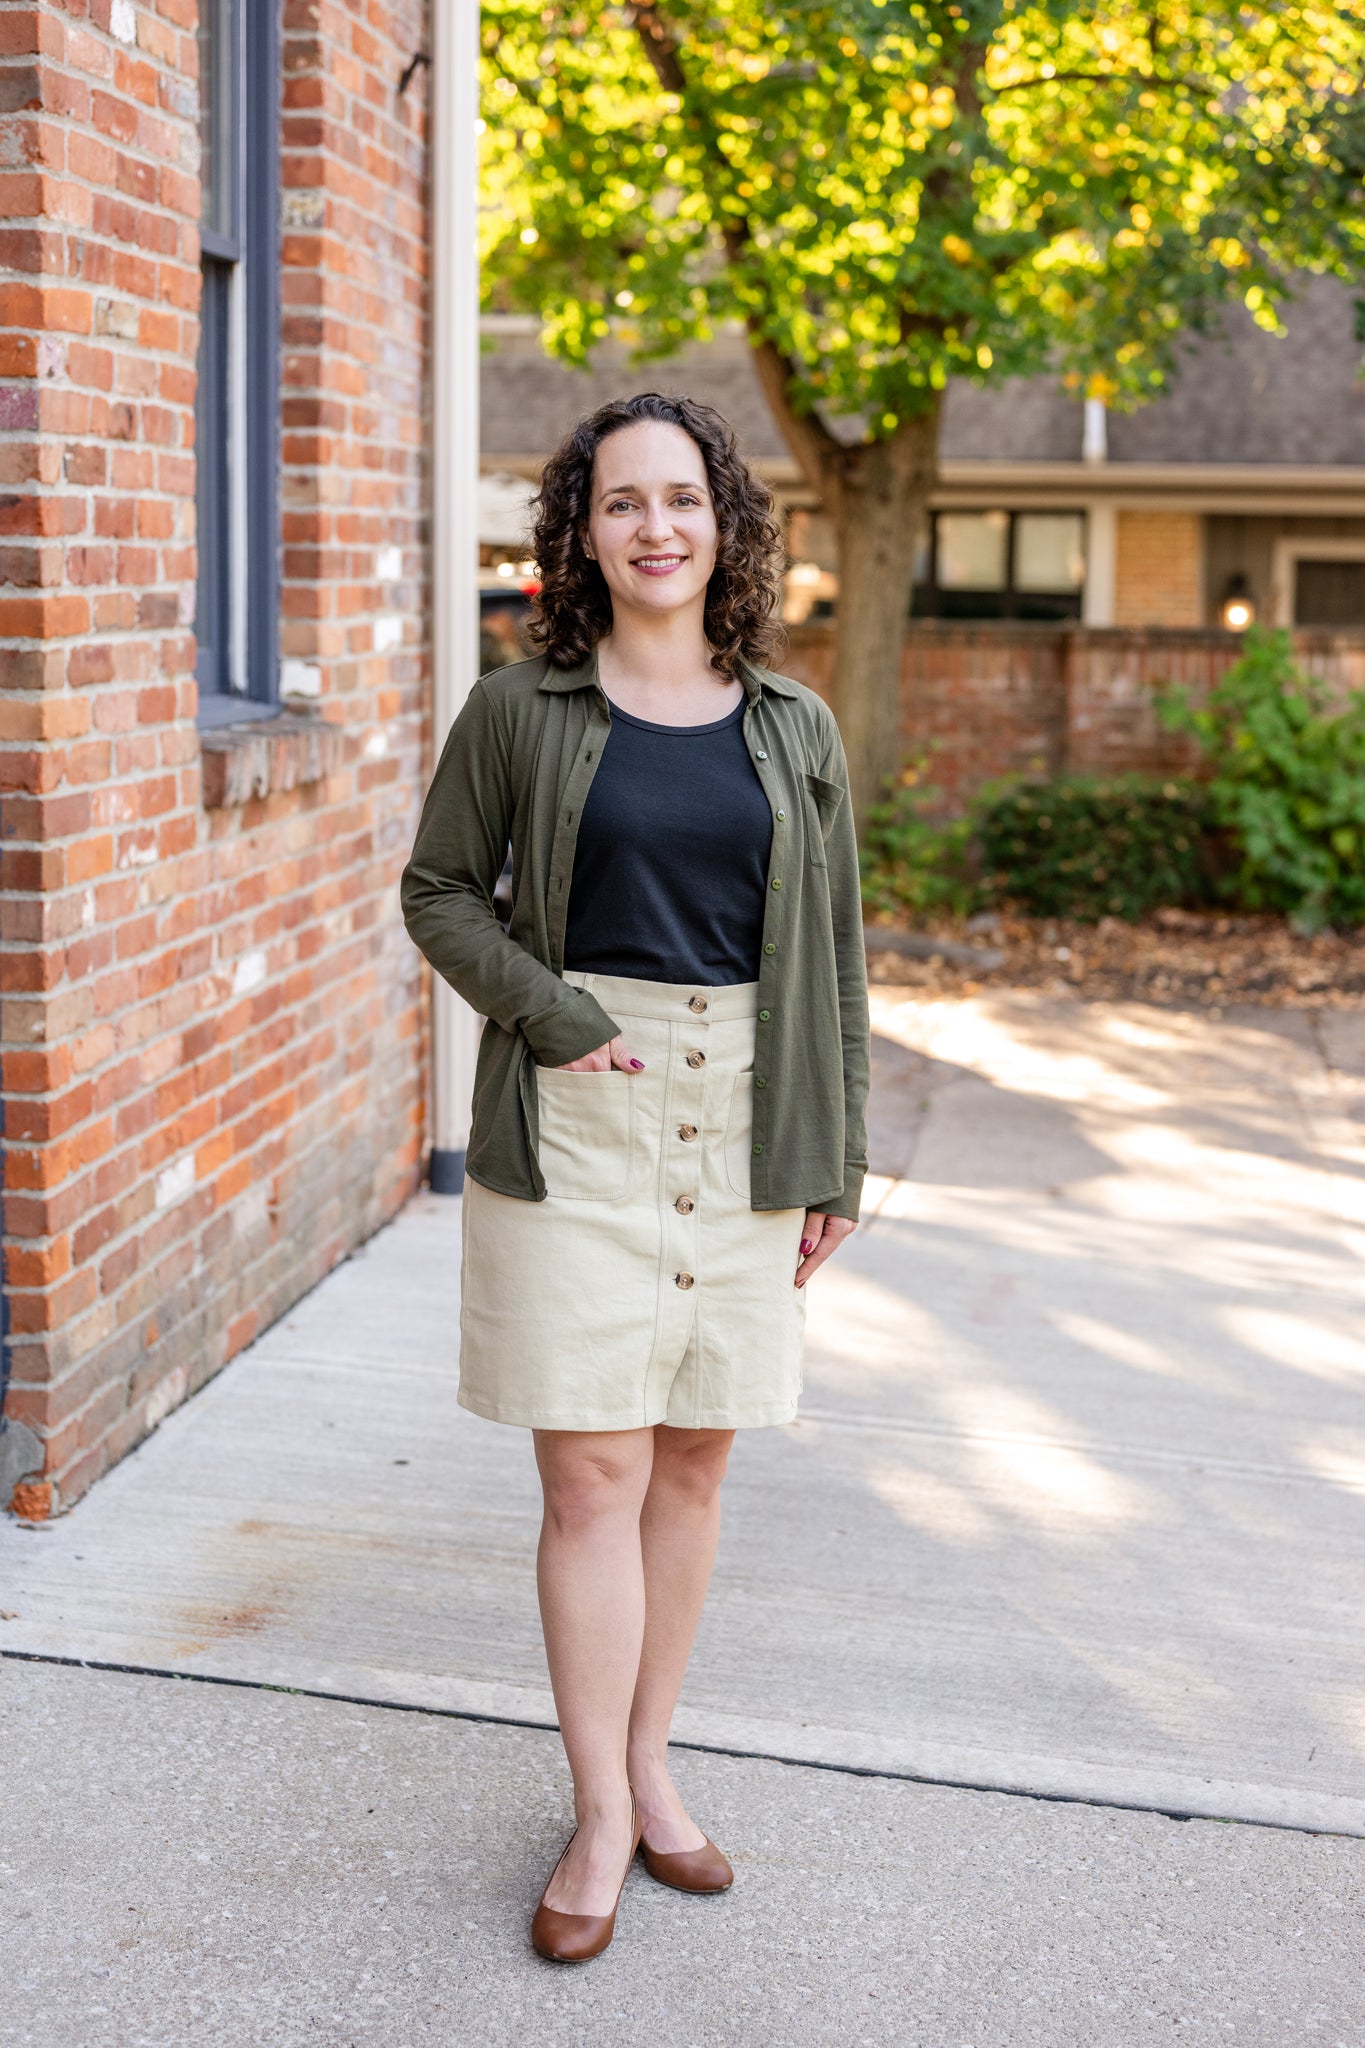 Leah' Stretch Denim Skirt in Olive – The Main Street Exchange